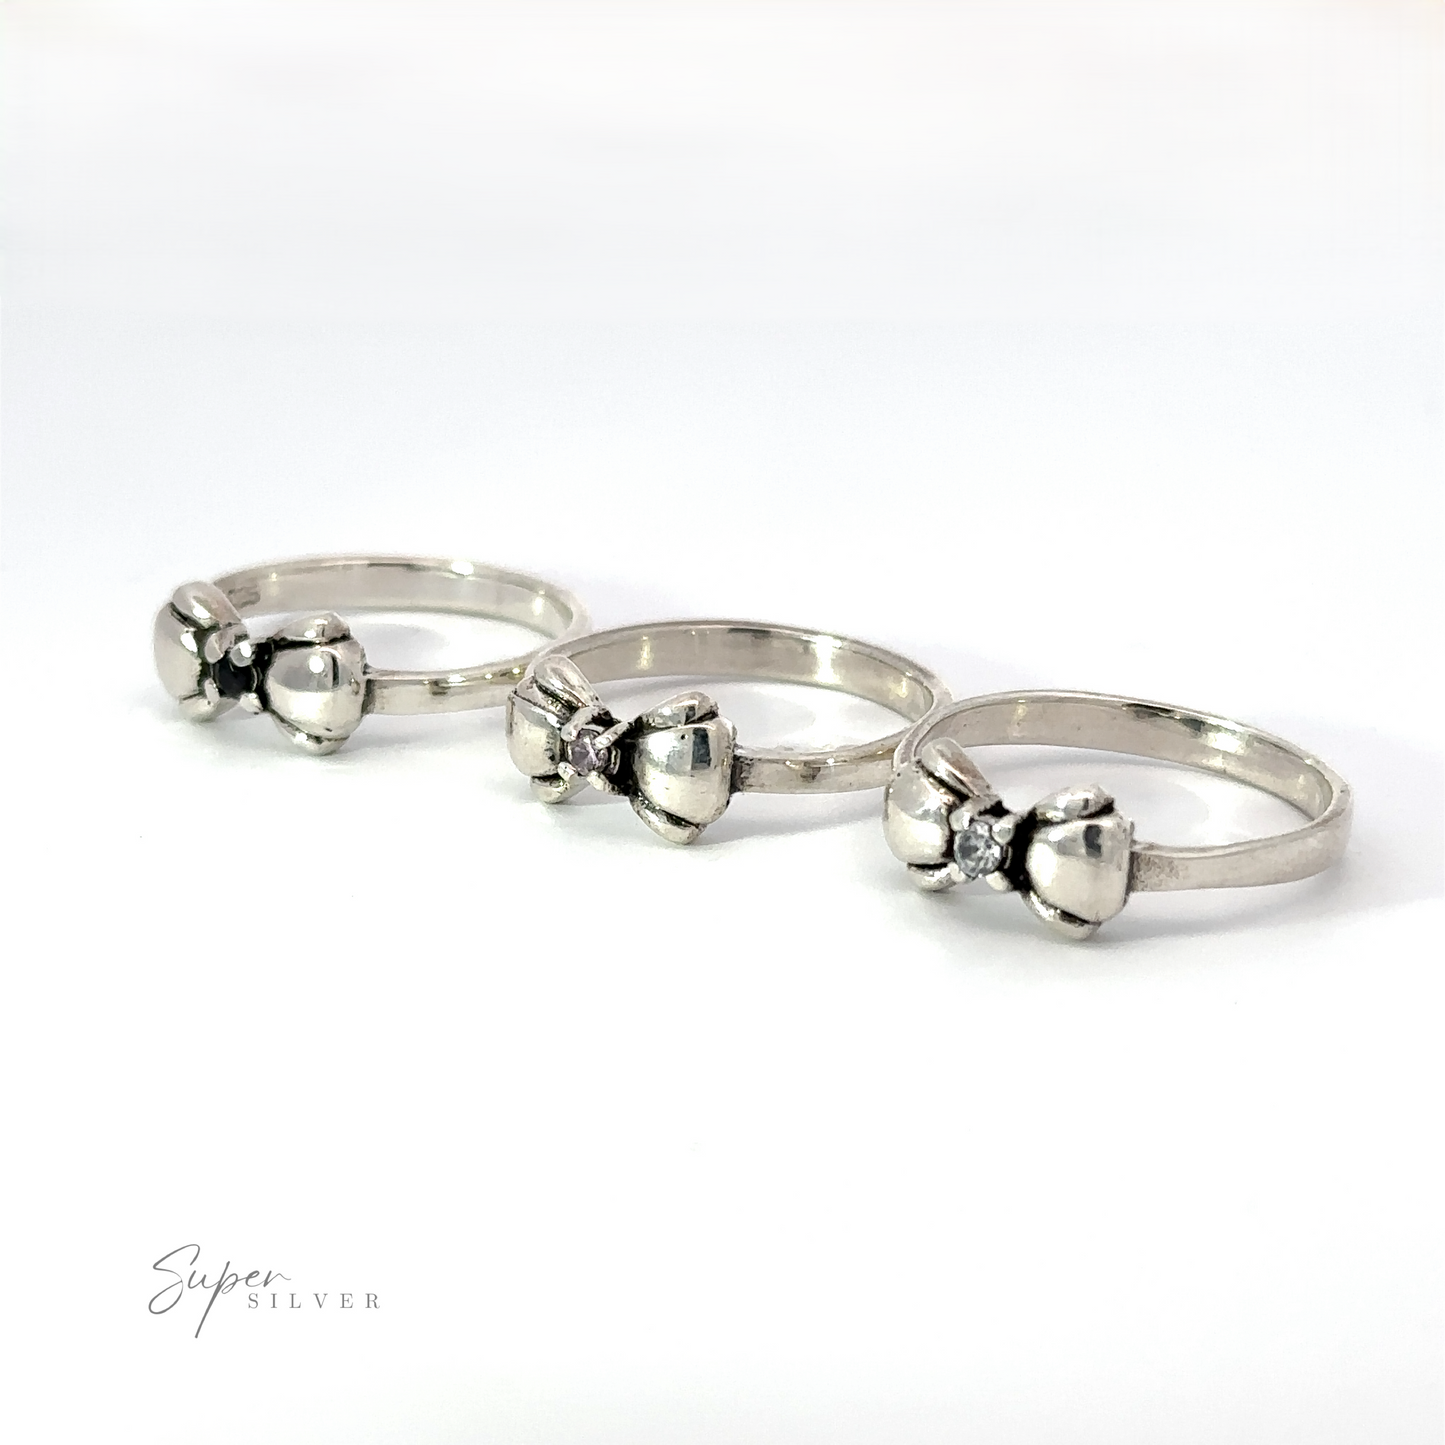 Three Adorable Cubic Zirconia Bow Rings, each adorned with a small bow, are lined up side by side on a white surface. The text "Super Silver" is in the bottom left corner.